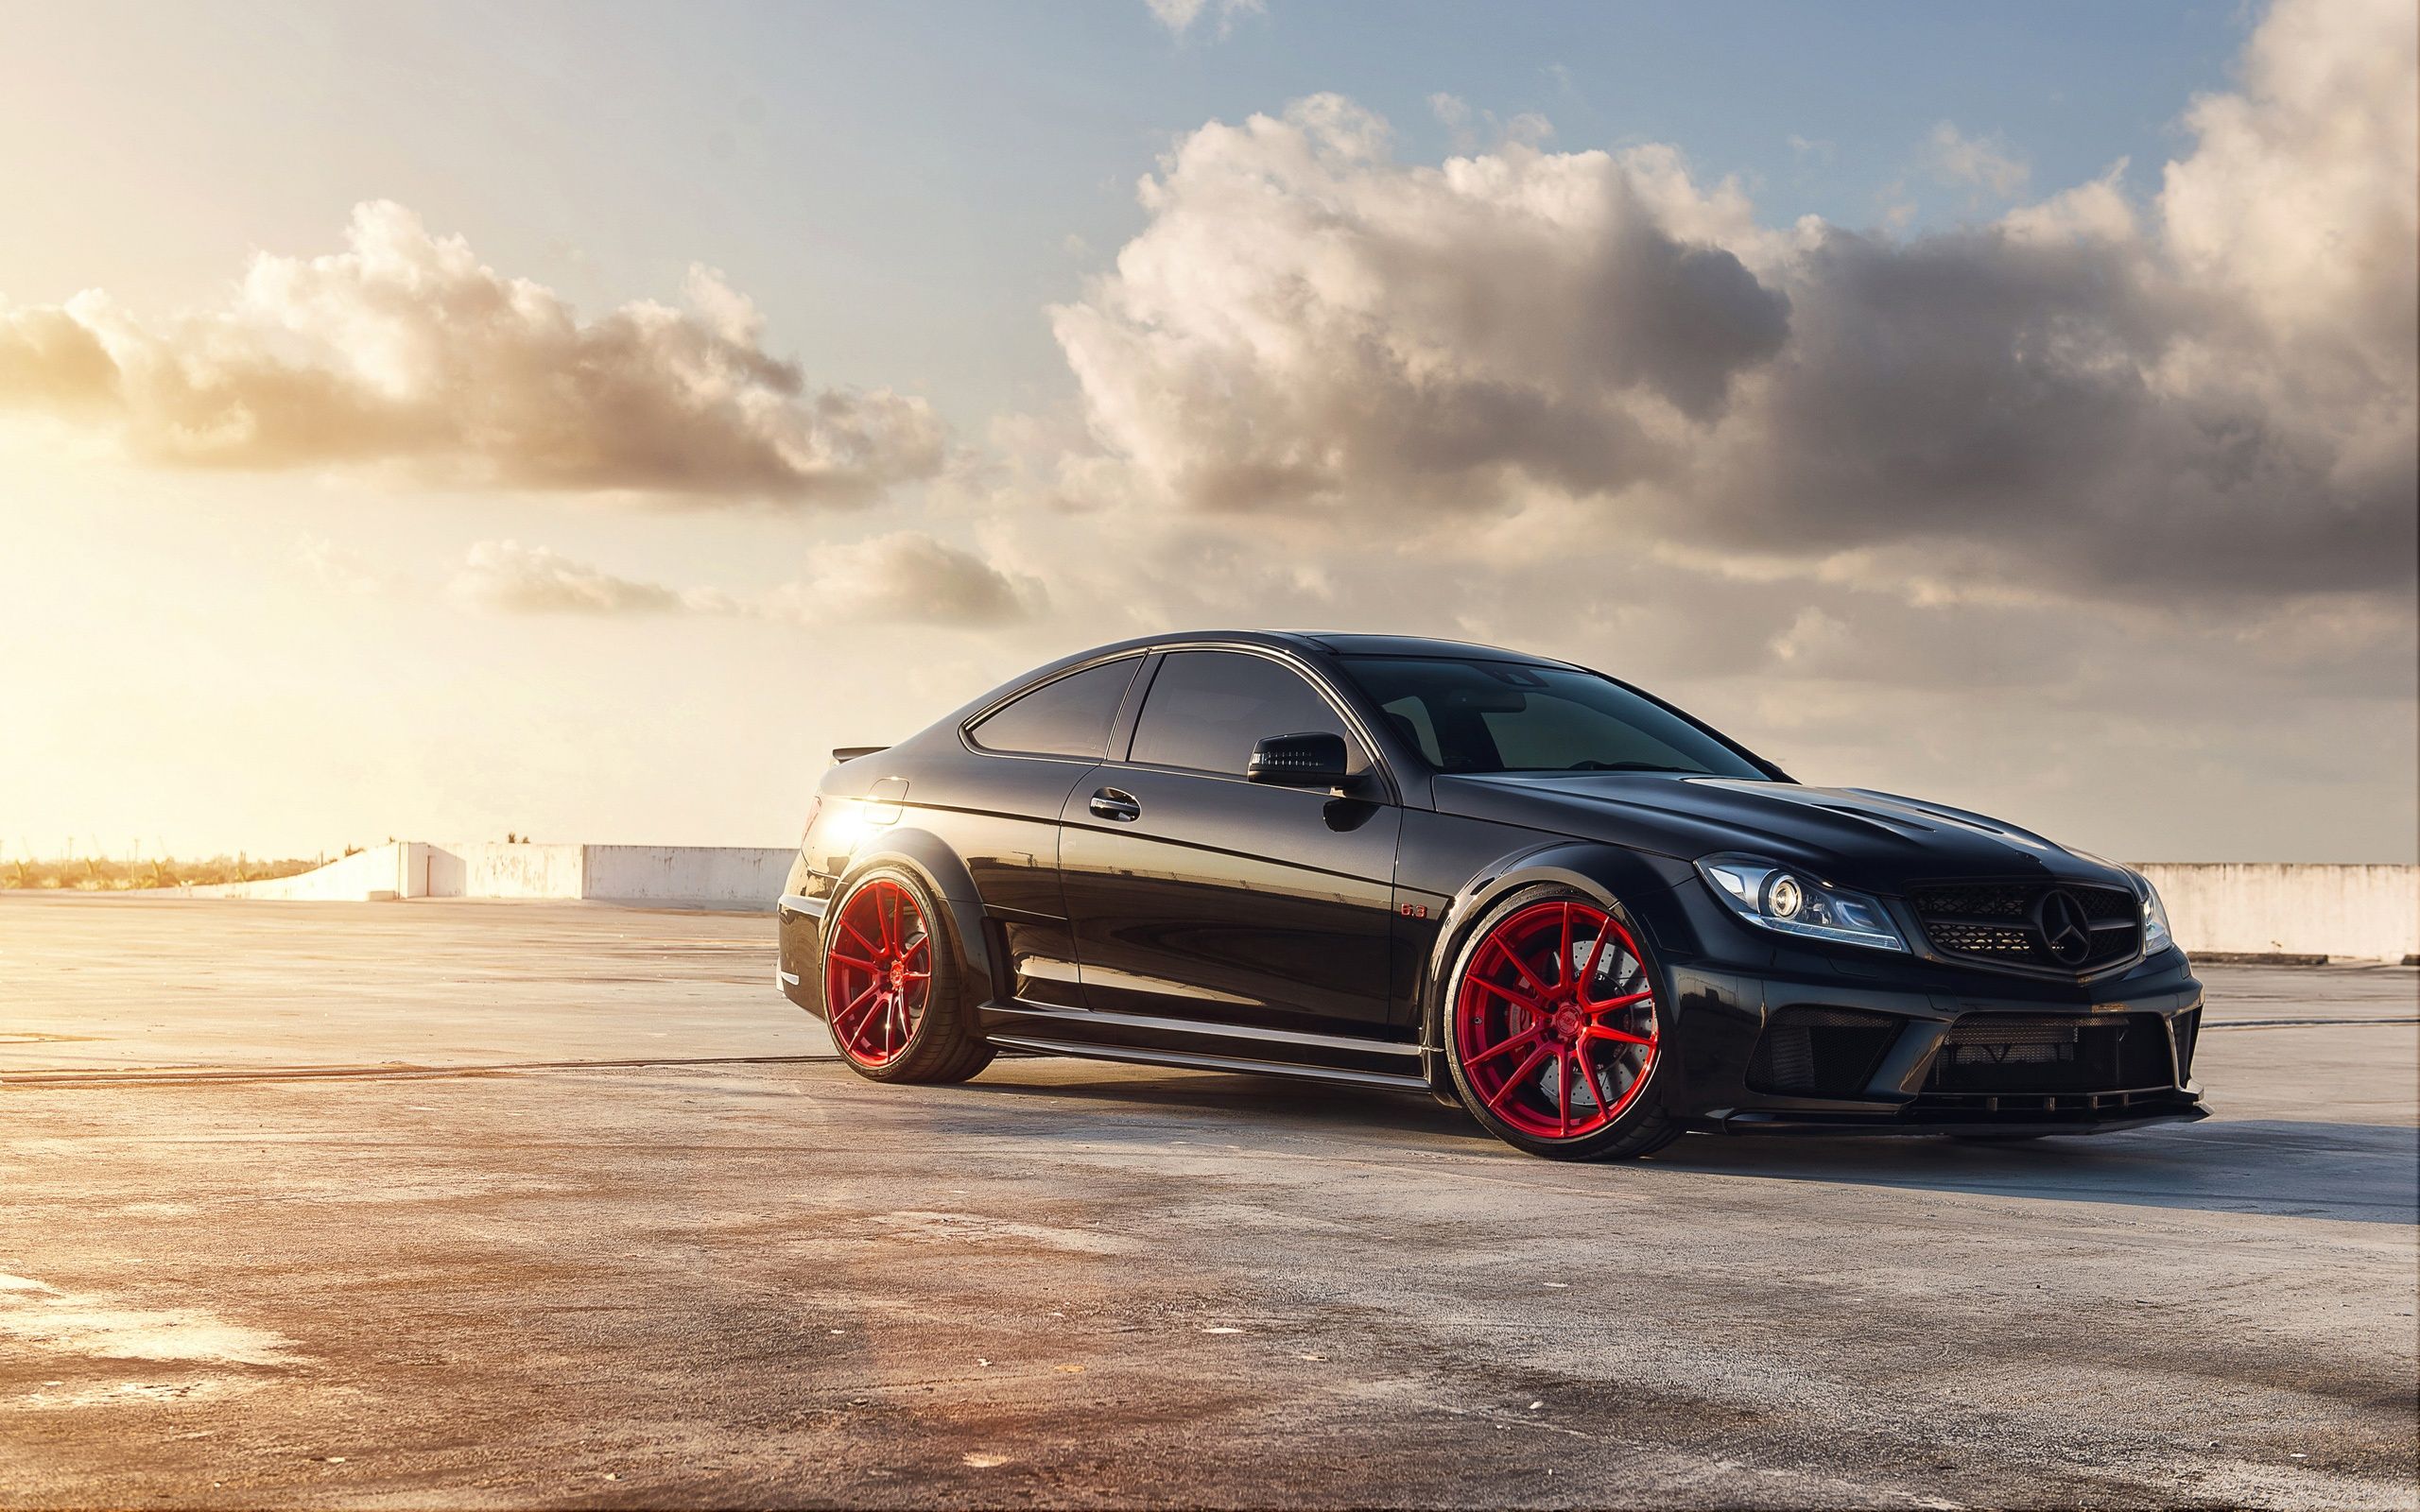 Mercedes Benz C63 AMG Wallpapers | HD Wallpapers